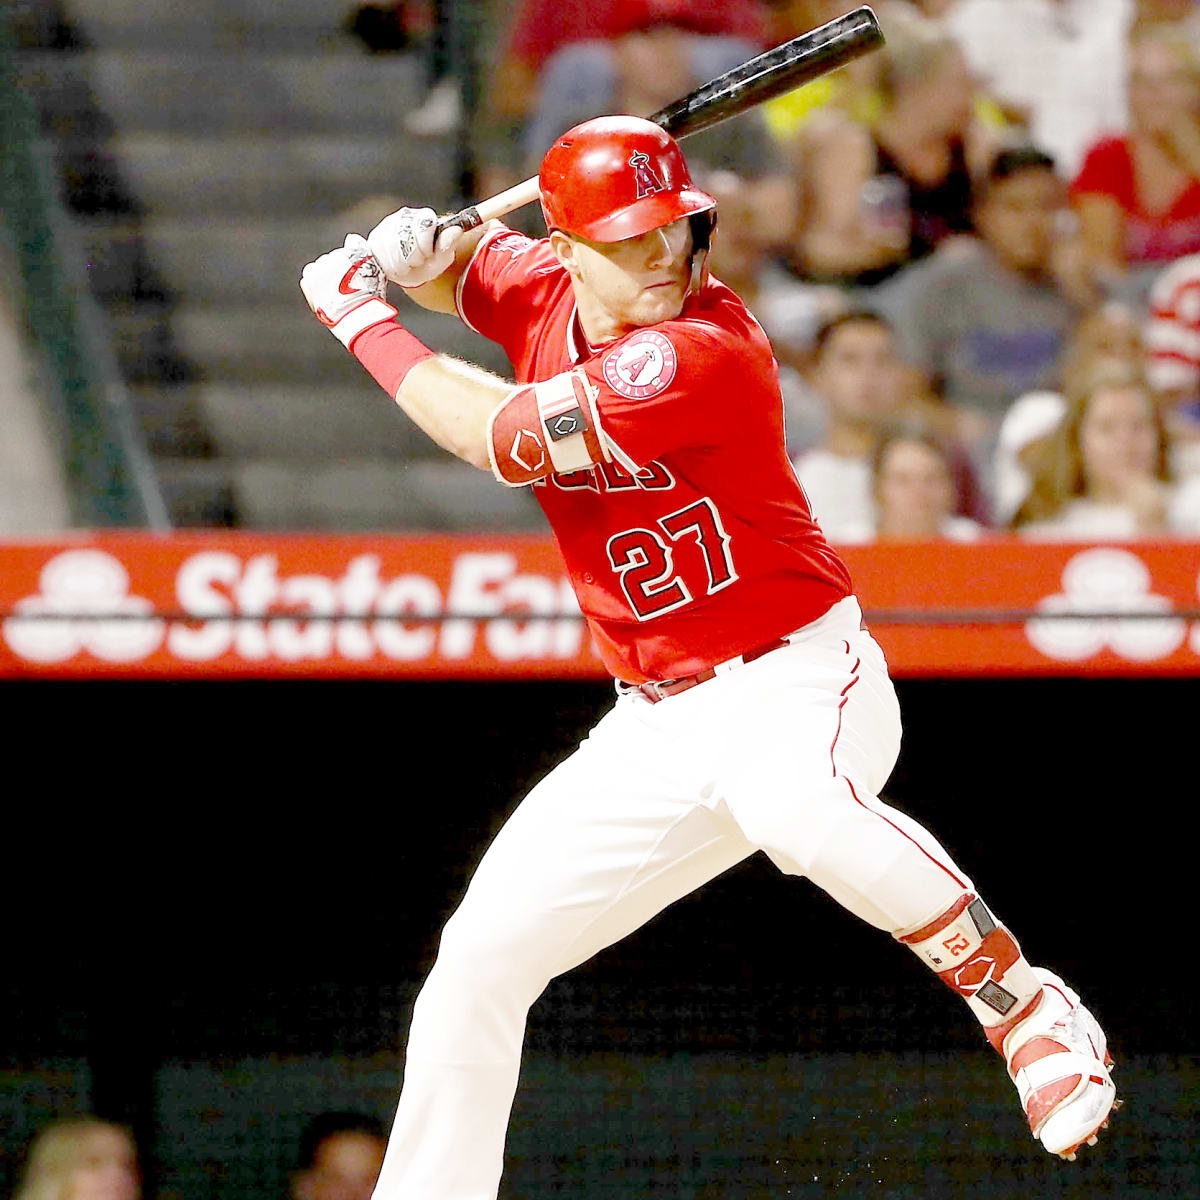 Los Angeles Angels have failed Mike Trout once again - Sports Illustrated